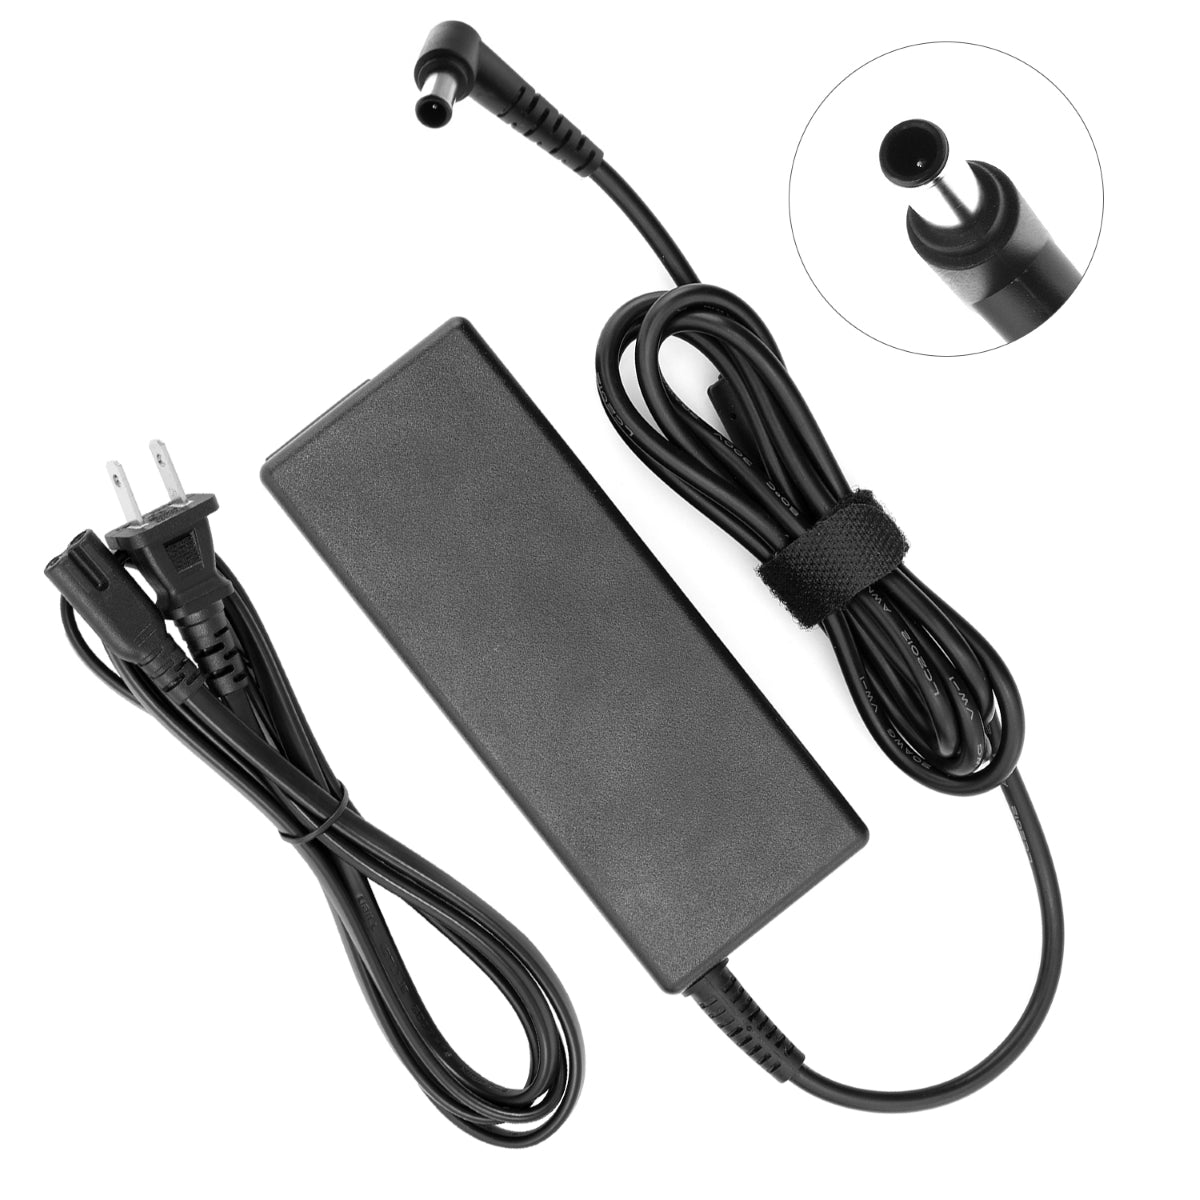 AC Adapter Power Supply for Samsung LTM1575 LCD TV Monitor